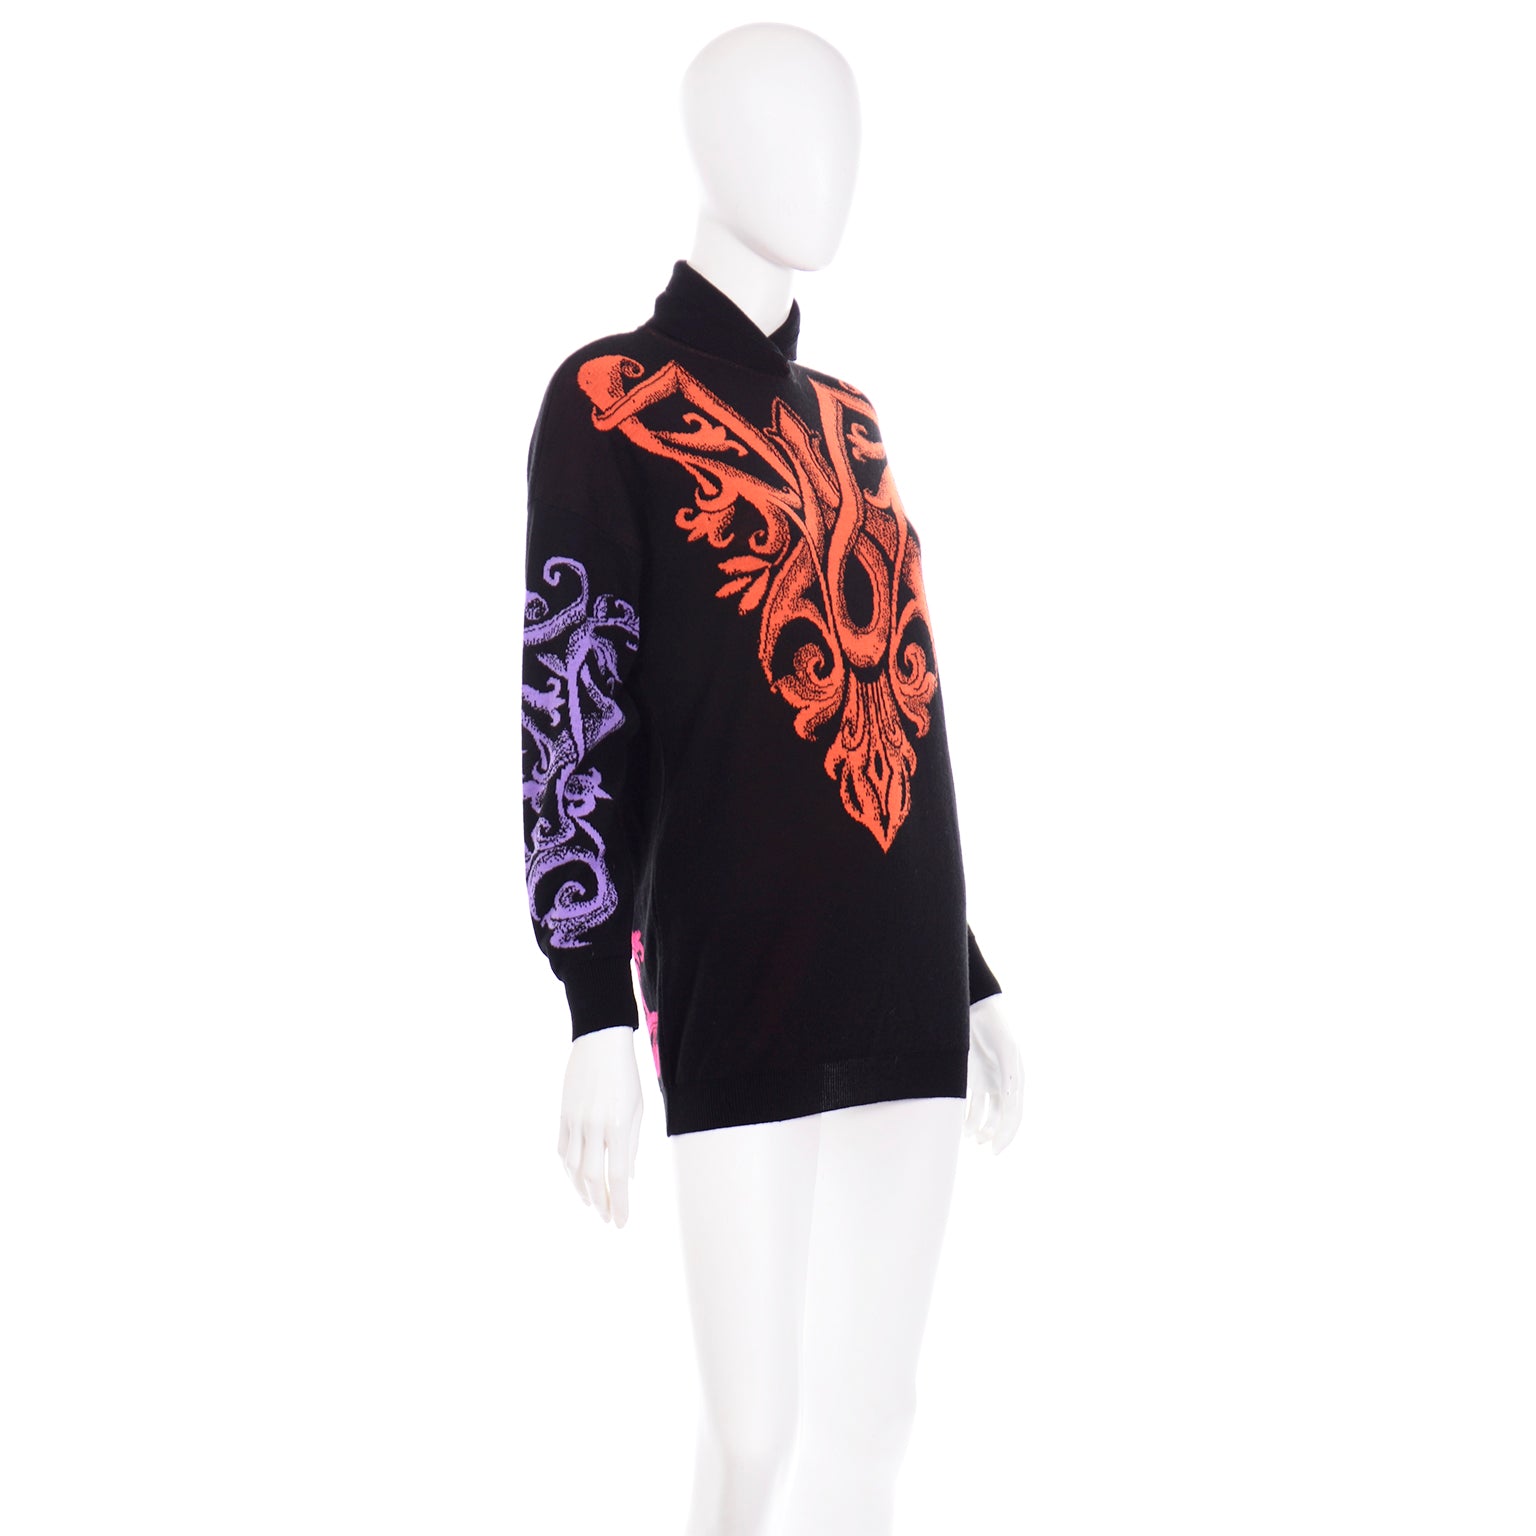 Gianni Versace Pattern 3D Ugly Sweater Luxury Brand Clothing Clothes Outfit, by Cootie Shop